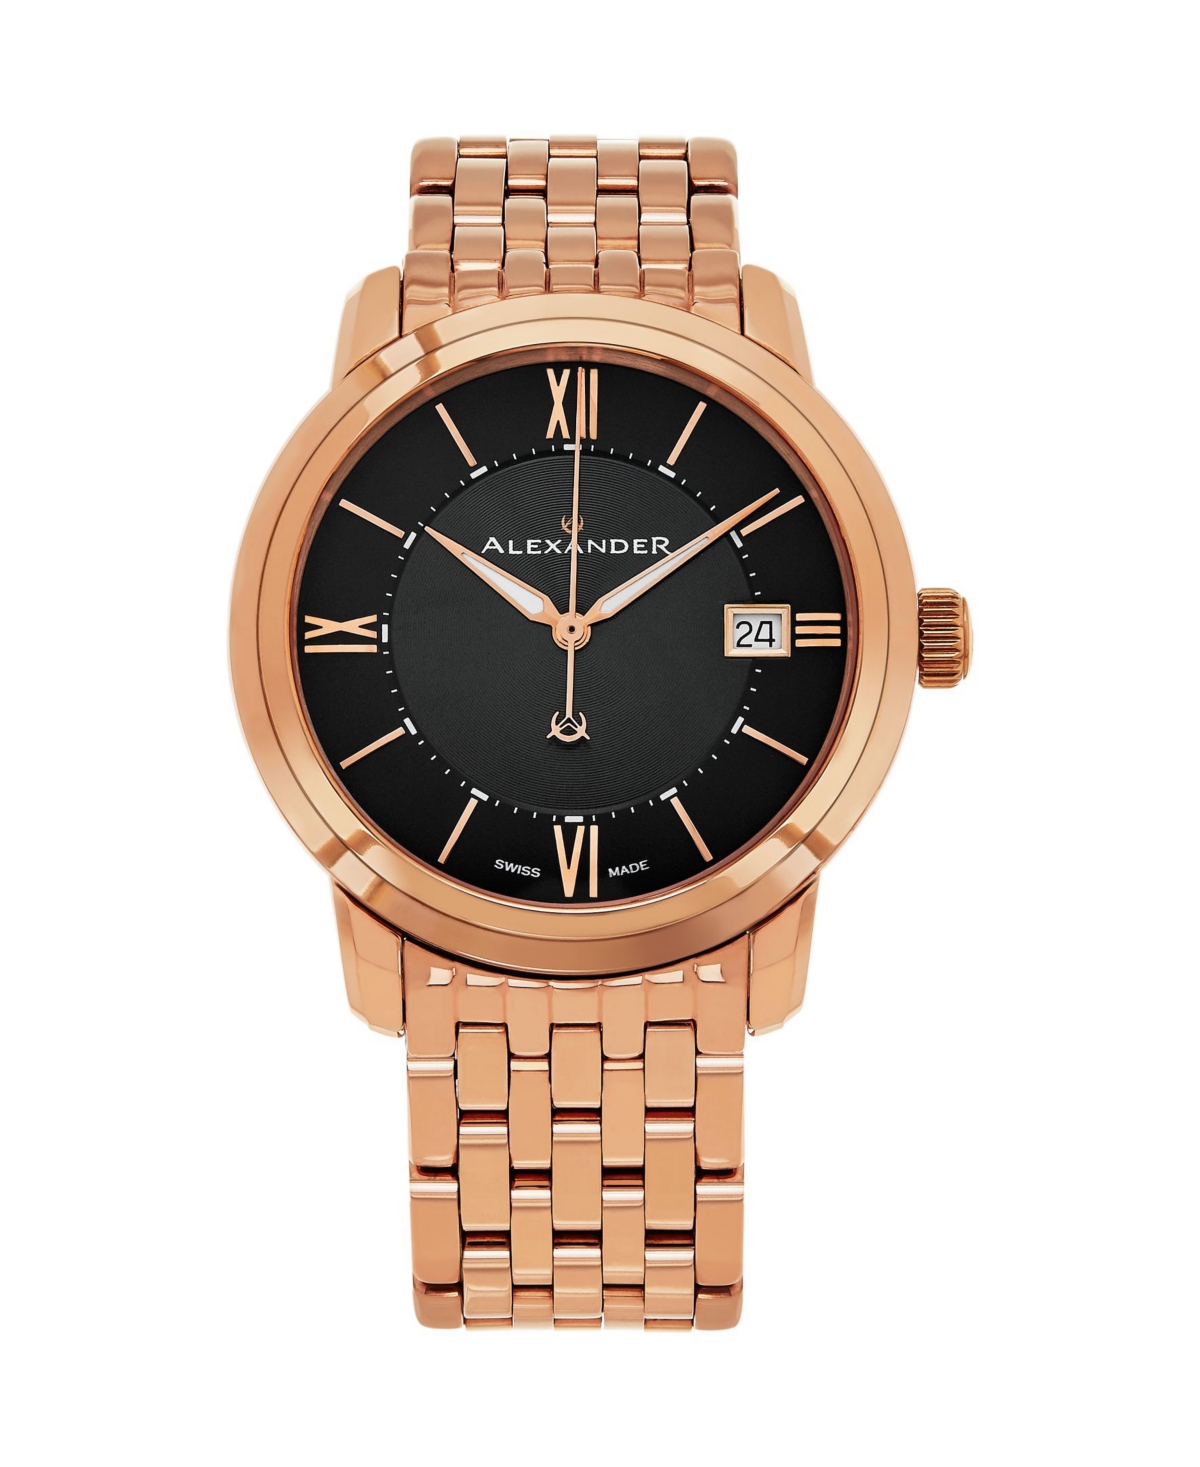 Alexander Watch A111B-07, Stainless Steel Rose Gold Tone Case on Stainless Steel Rose Gold Tone Bracelet - Rose Gold